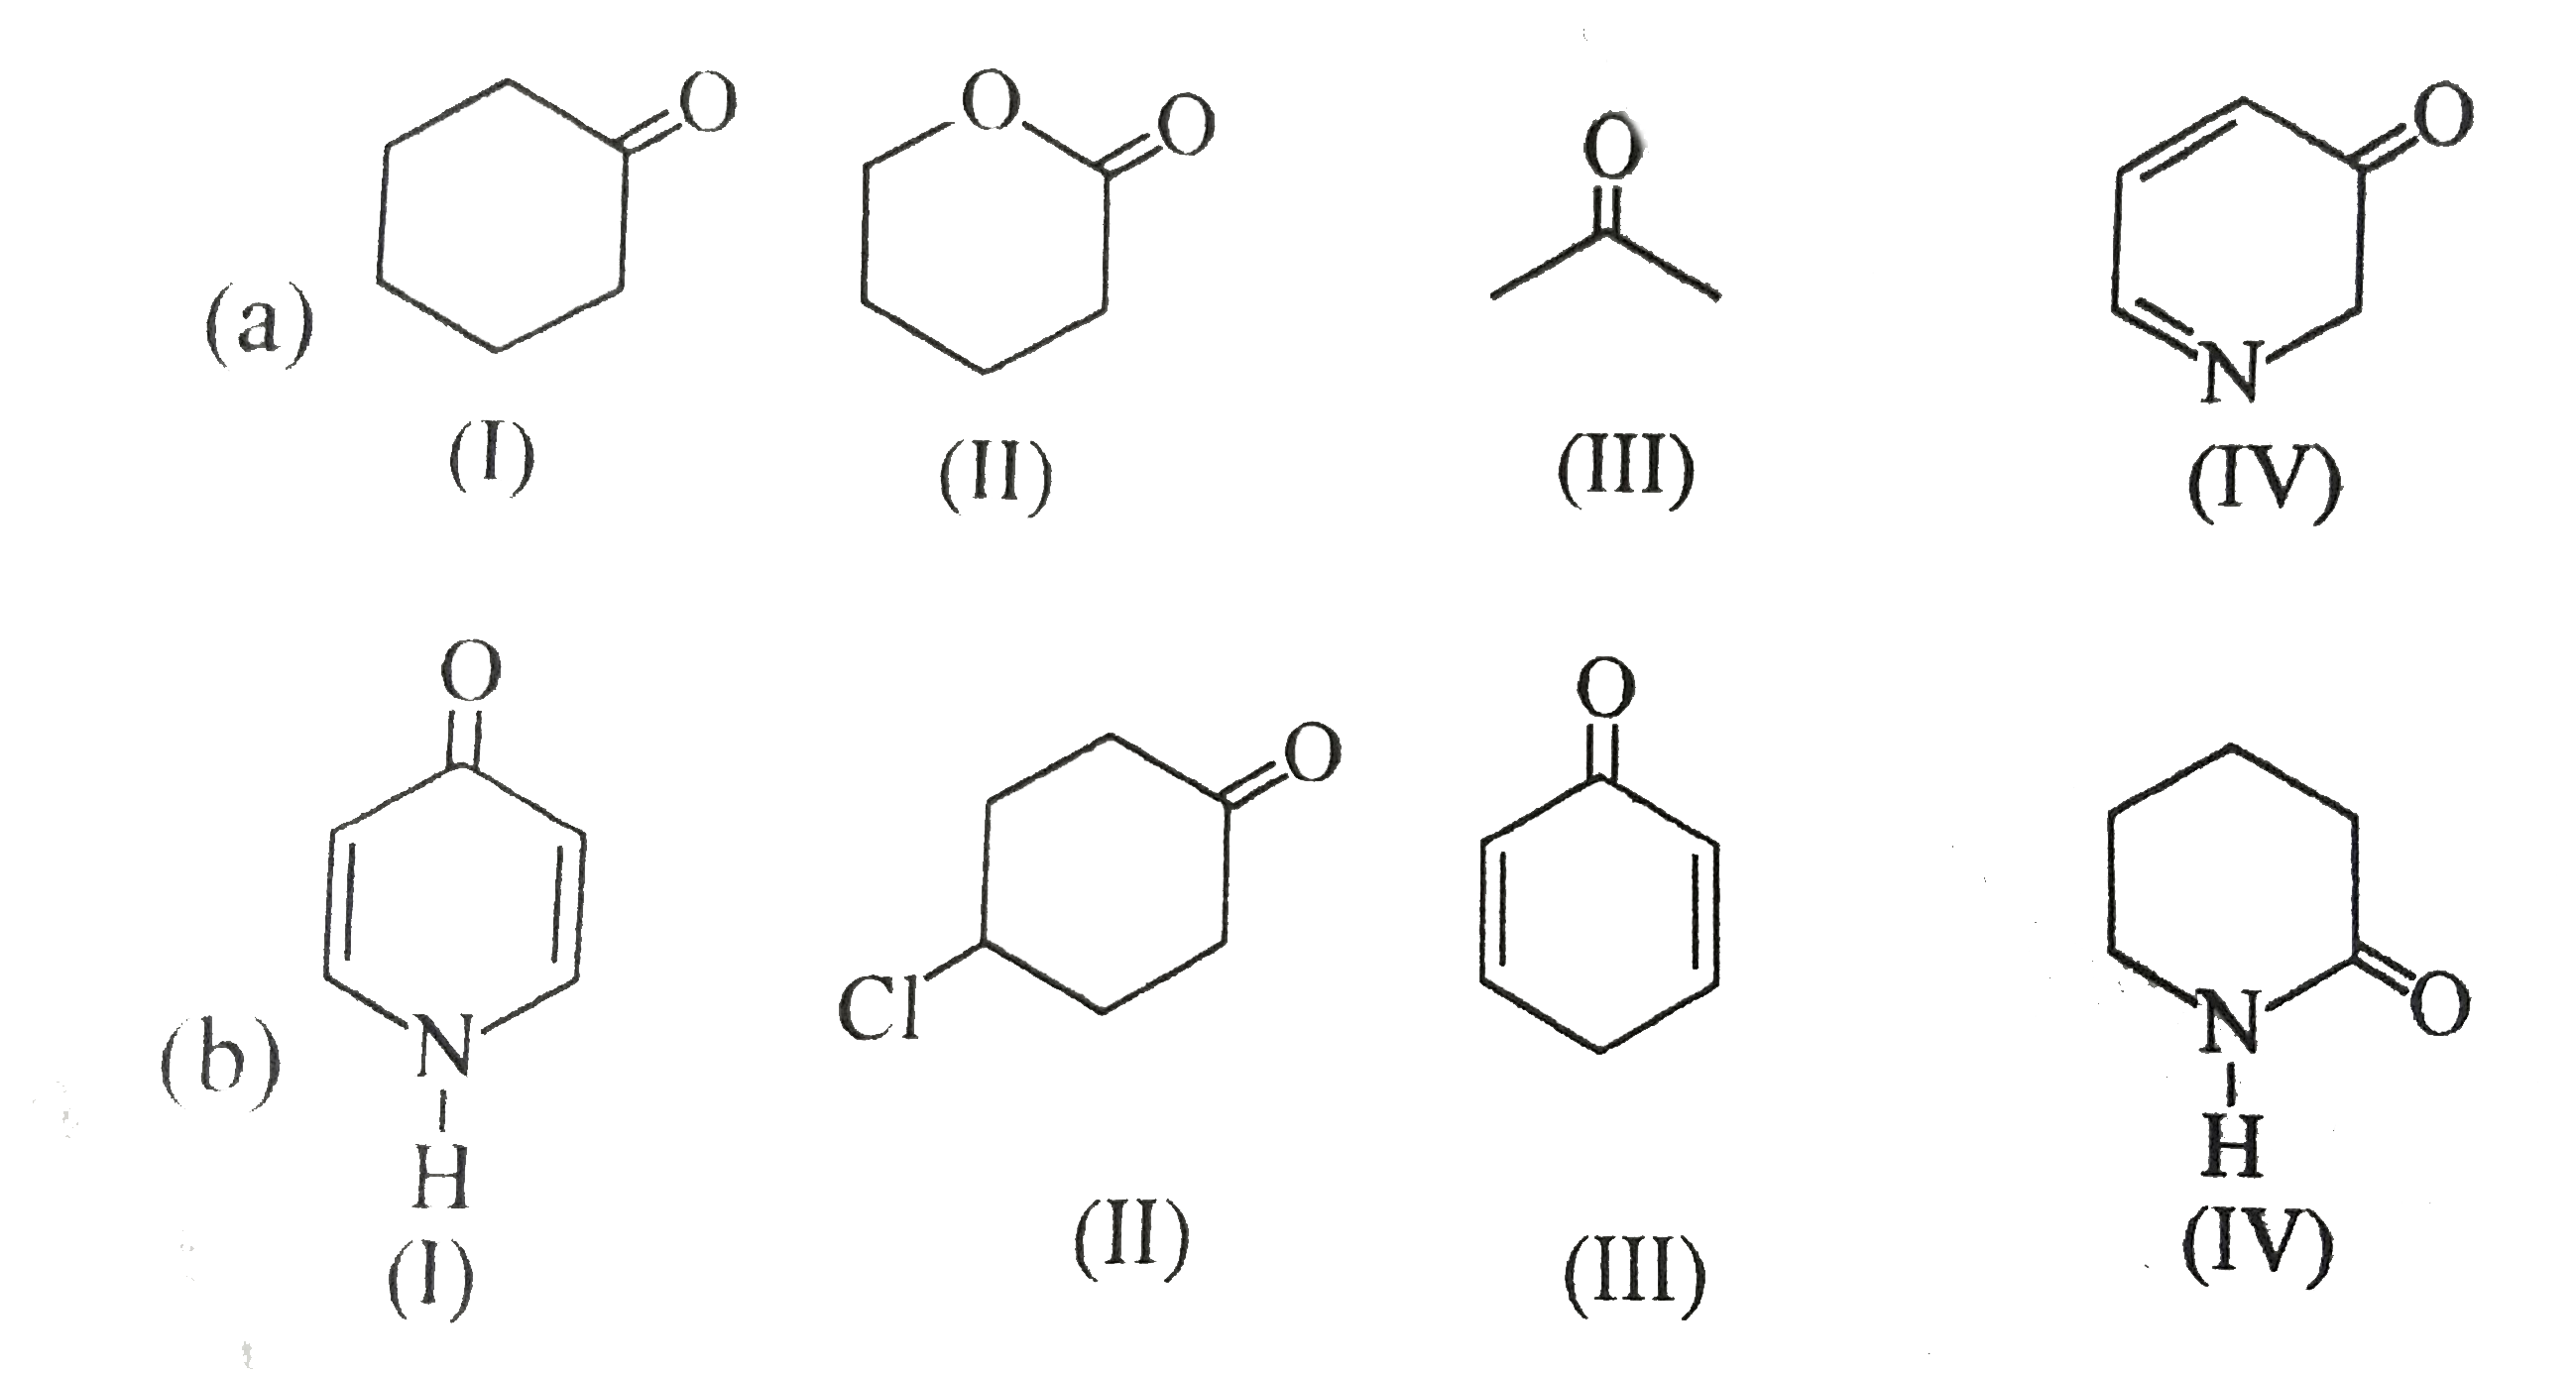 In each of the following sets of compounds write the decreasing order of % enol content